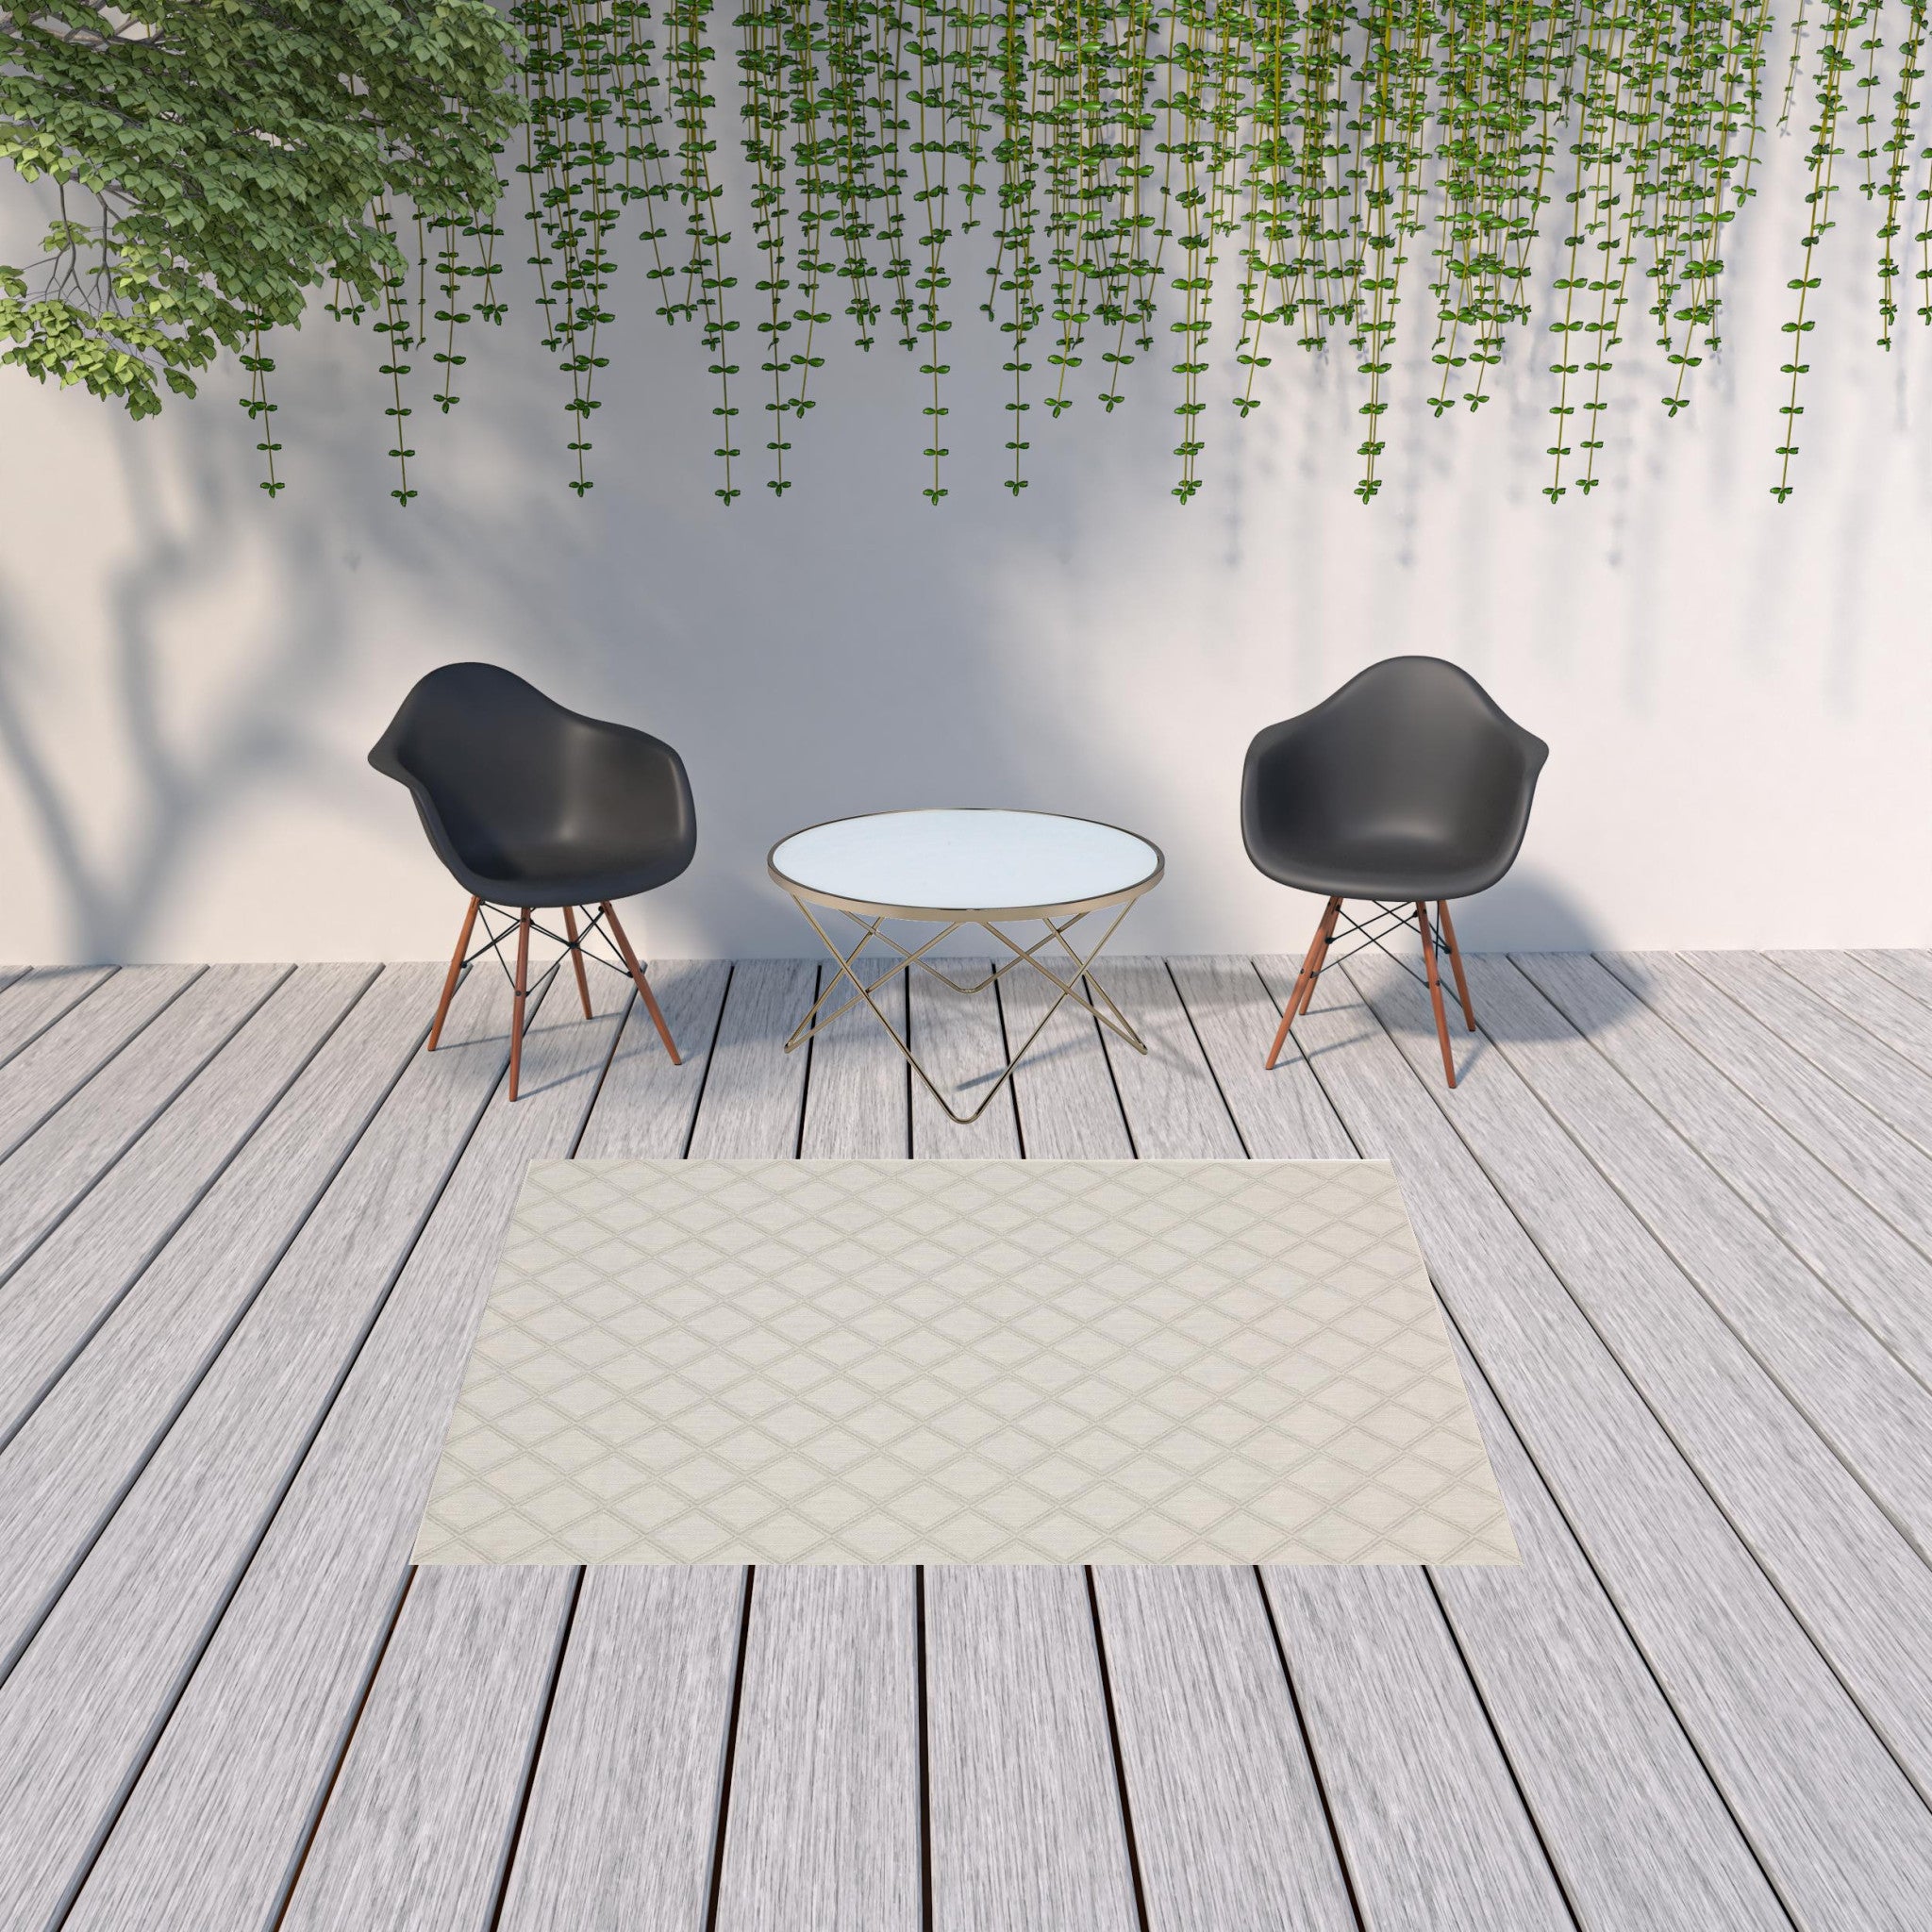 5' x 7' Gray and Ivory Geometric Stain Resistant Indoor Outdoor Area Rug